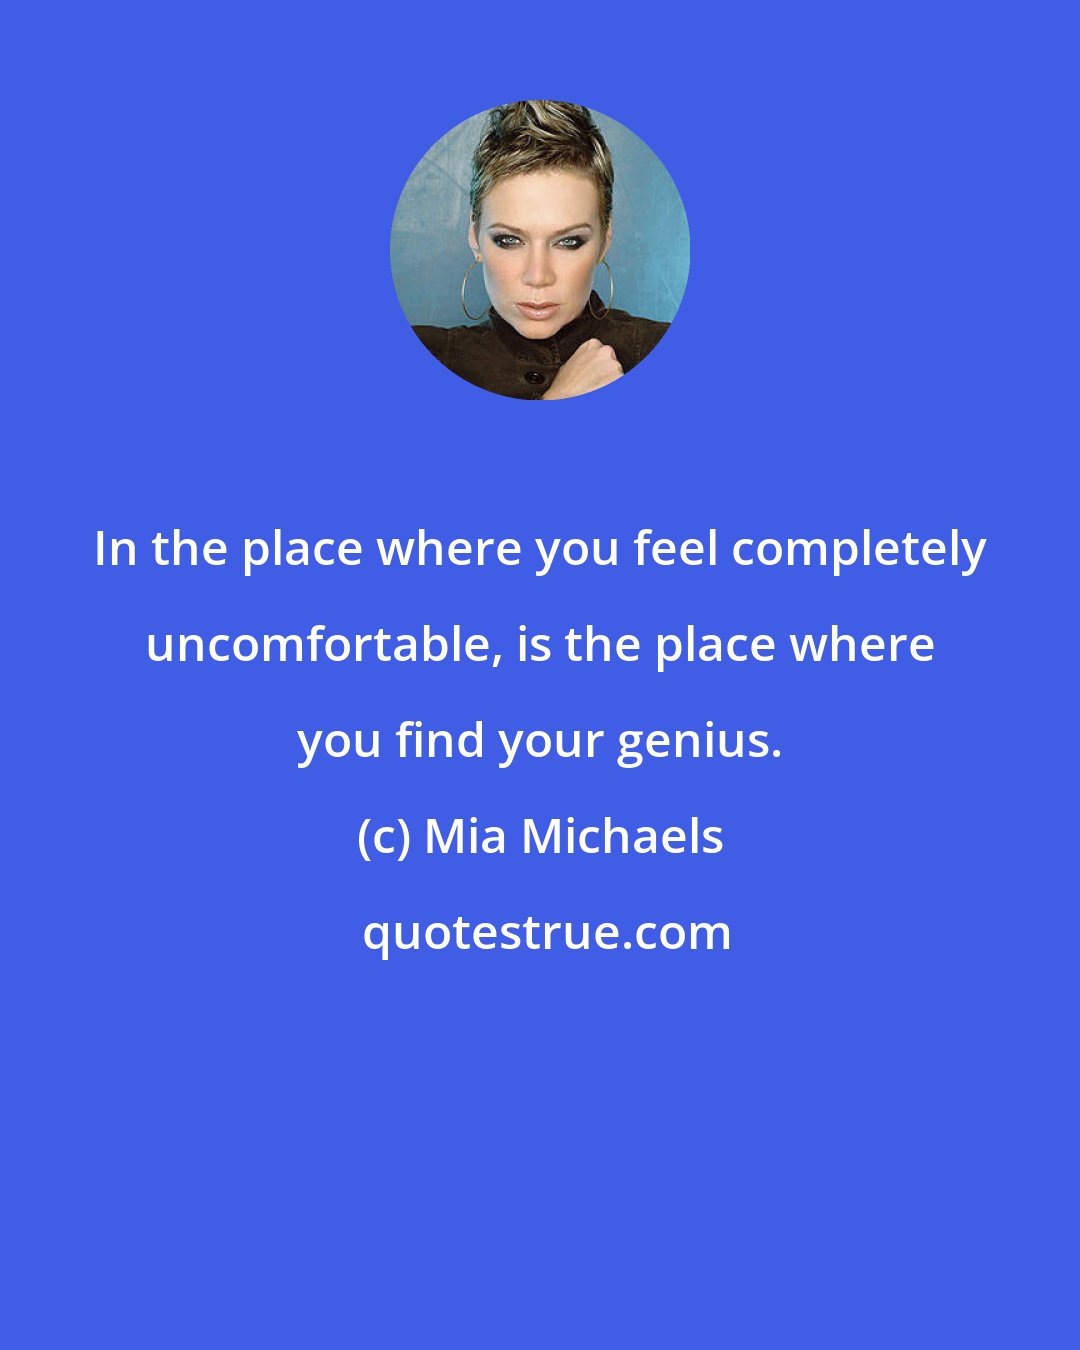 Mia Michaels: In the place where you feel completely uncomfortable, is the place where you find your genius.